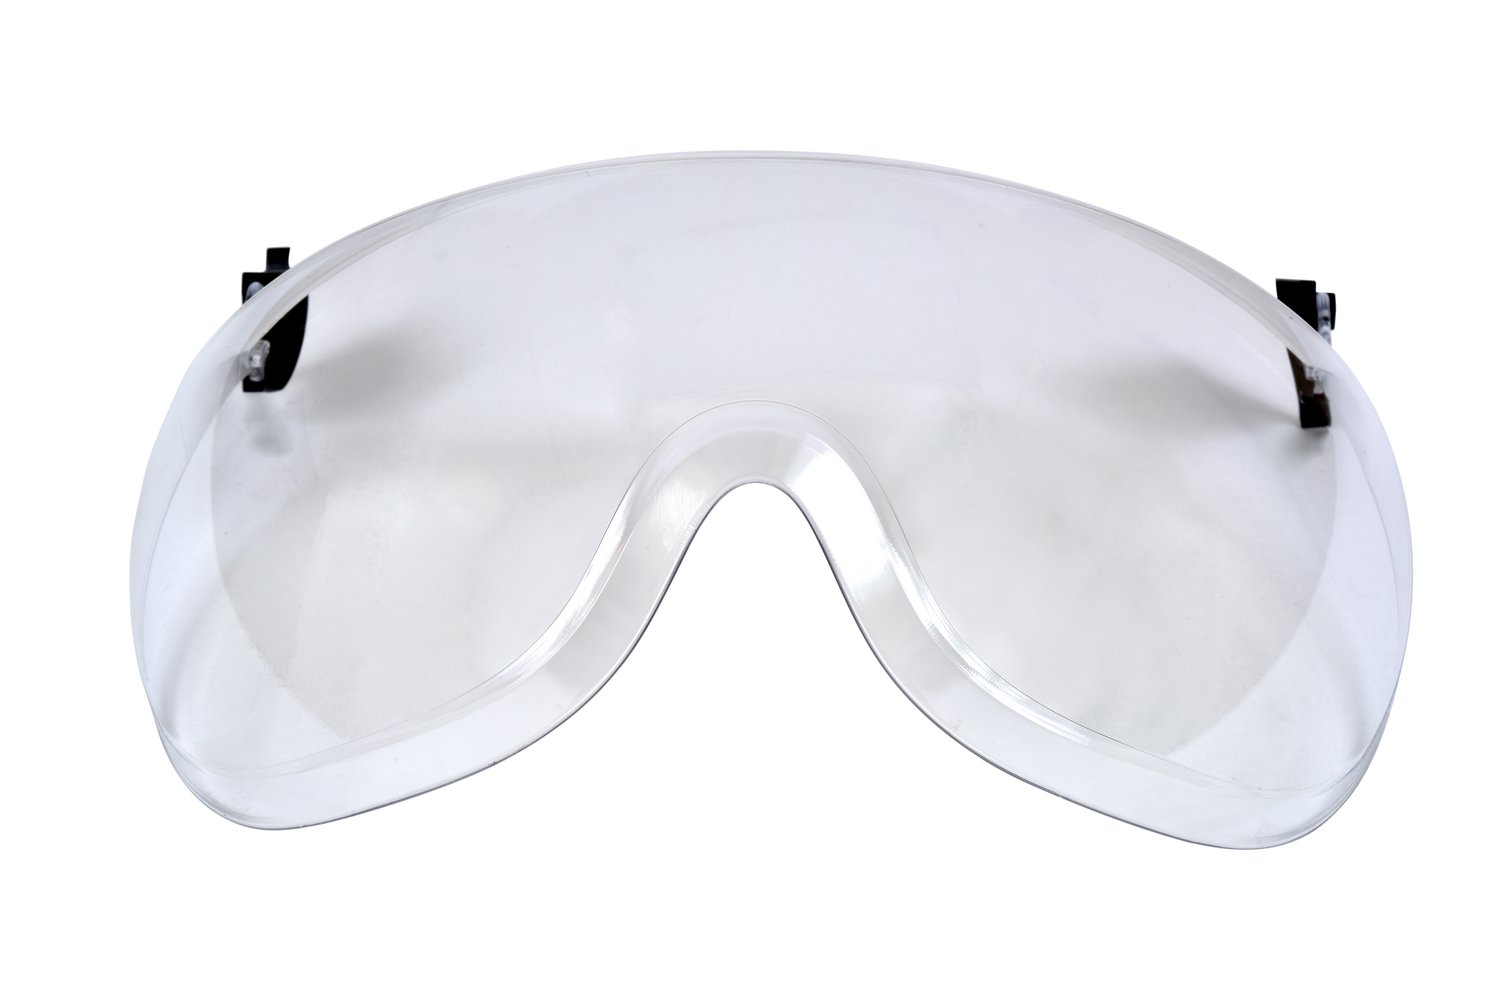 7100271583 - 3M Short Visor for X5000 Safety Helmet, X5-SV01-AD-DC, Clear with adapter